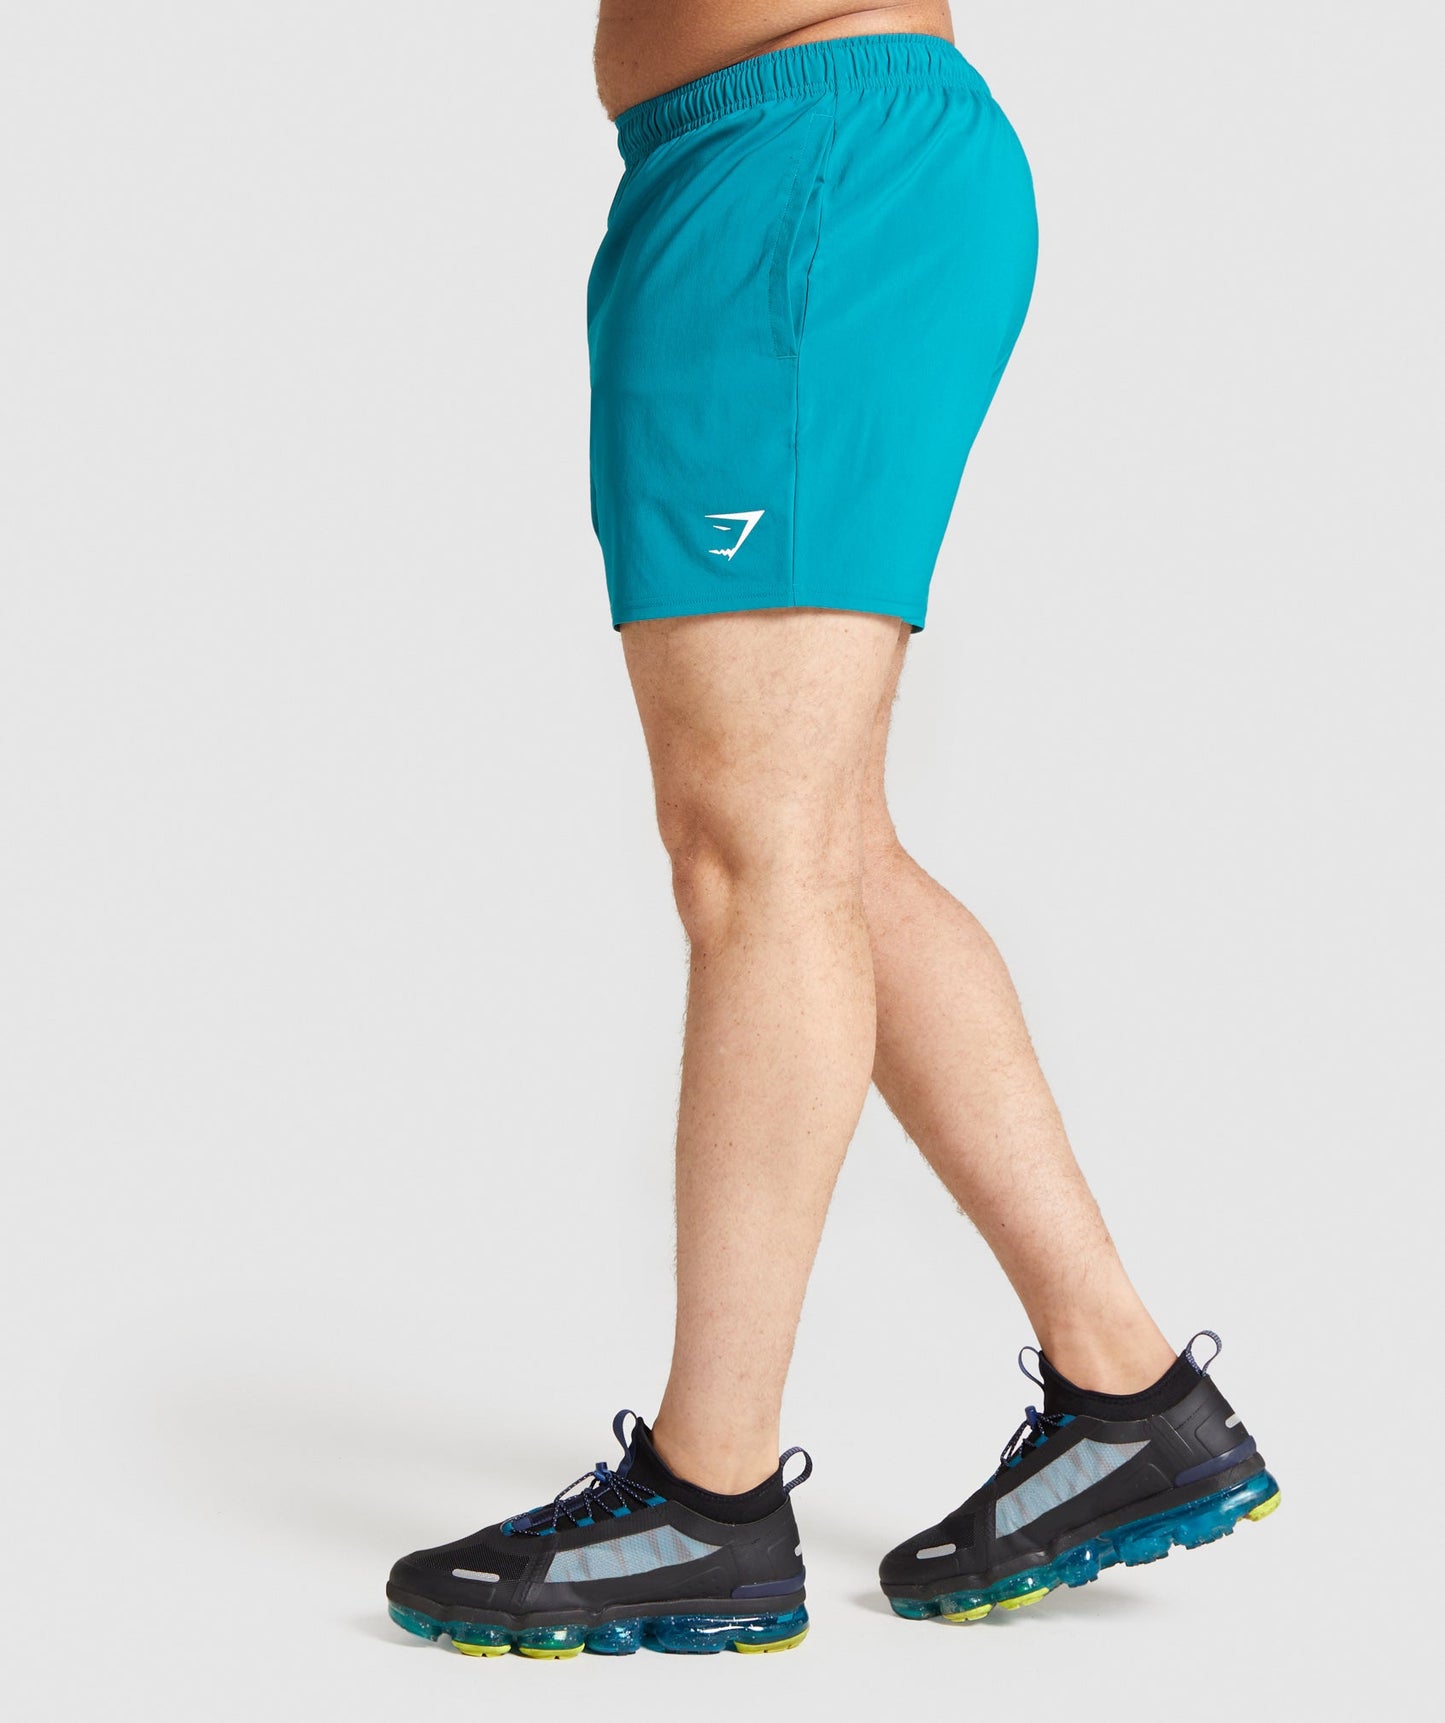 Gymshark Arrival 5 Shorts - Teal – Client 446 100K products